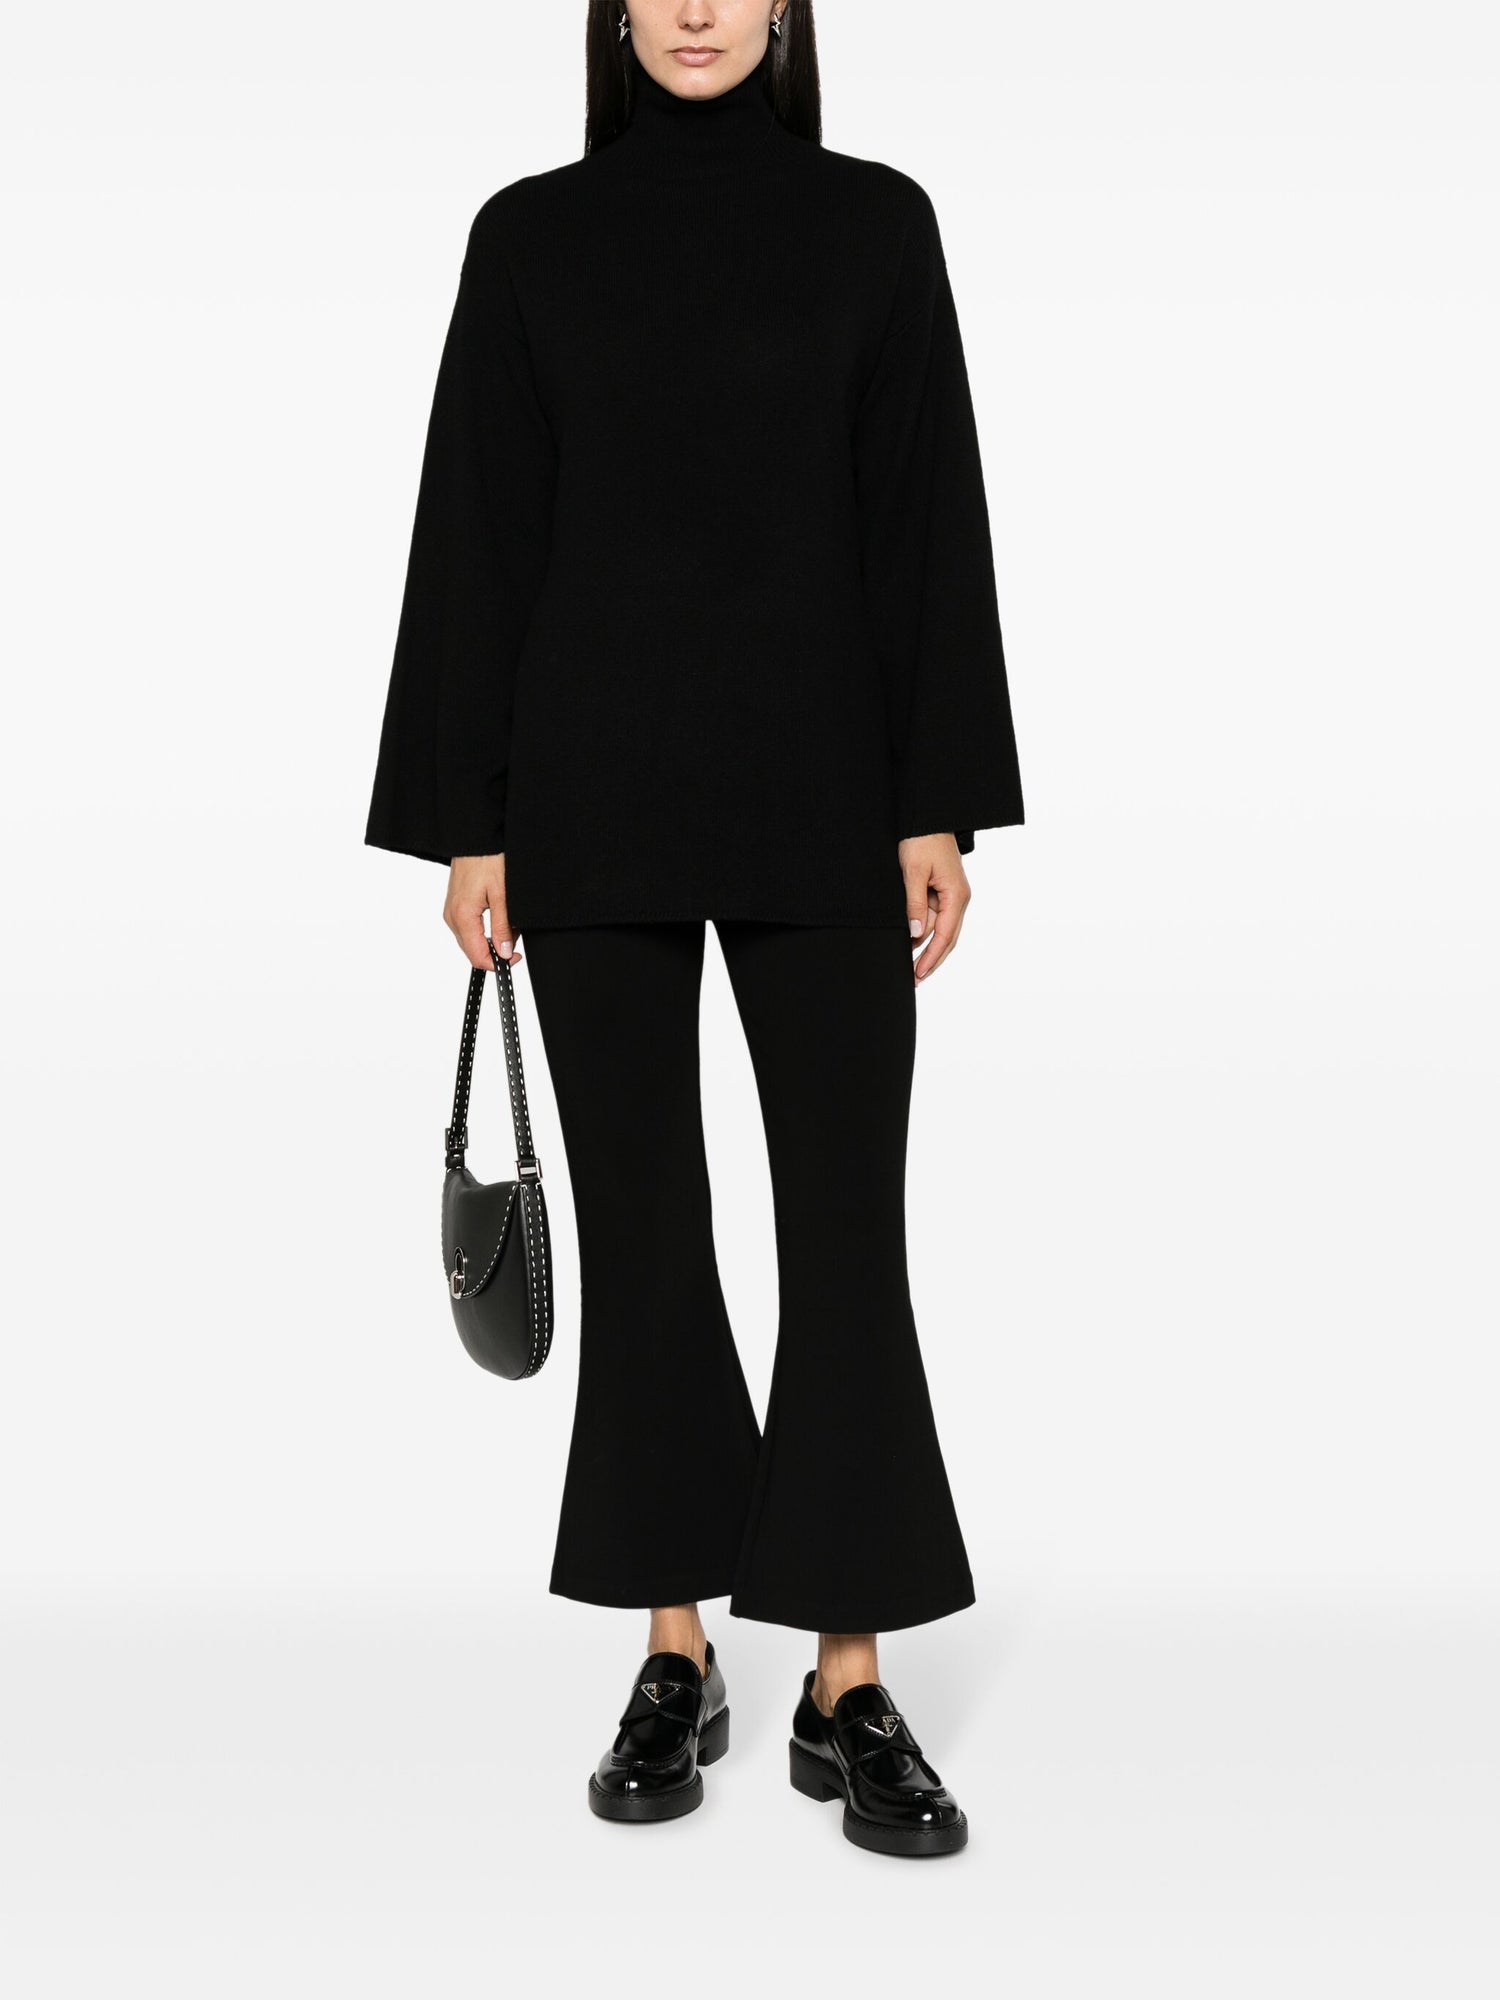 VILANNA cropped flared trousers, black